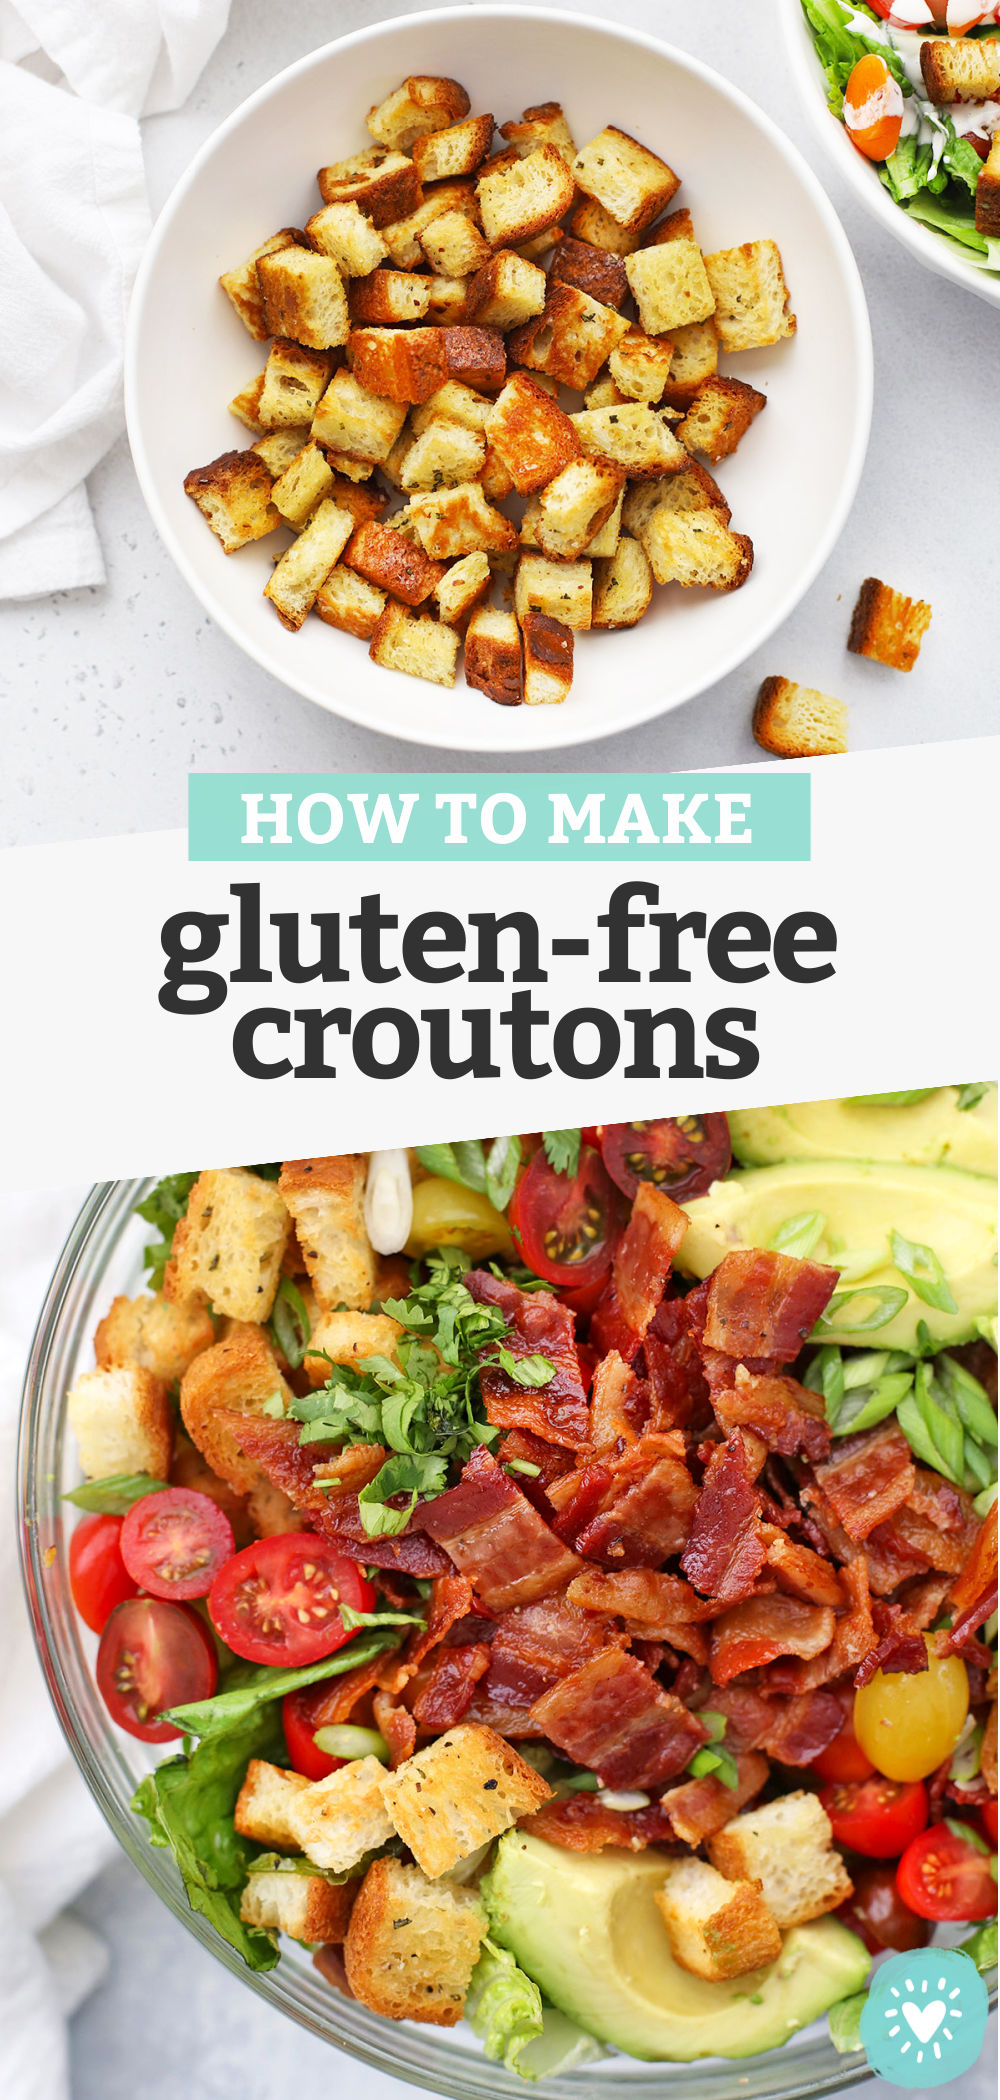 Collage of images of gluten-free croutons with text overlay that reads "How to Make Gluten-Free Croutons"